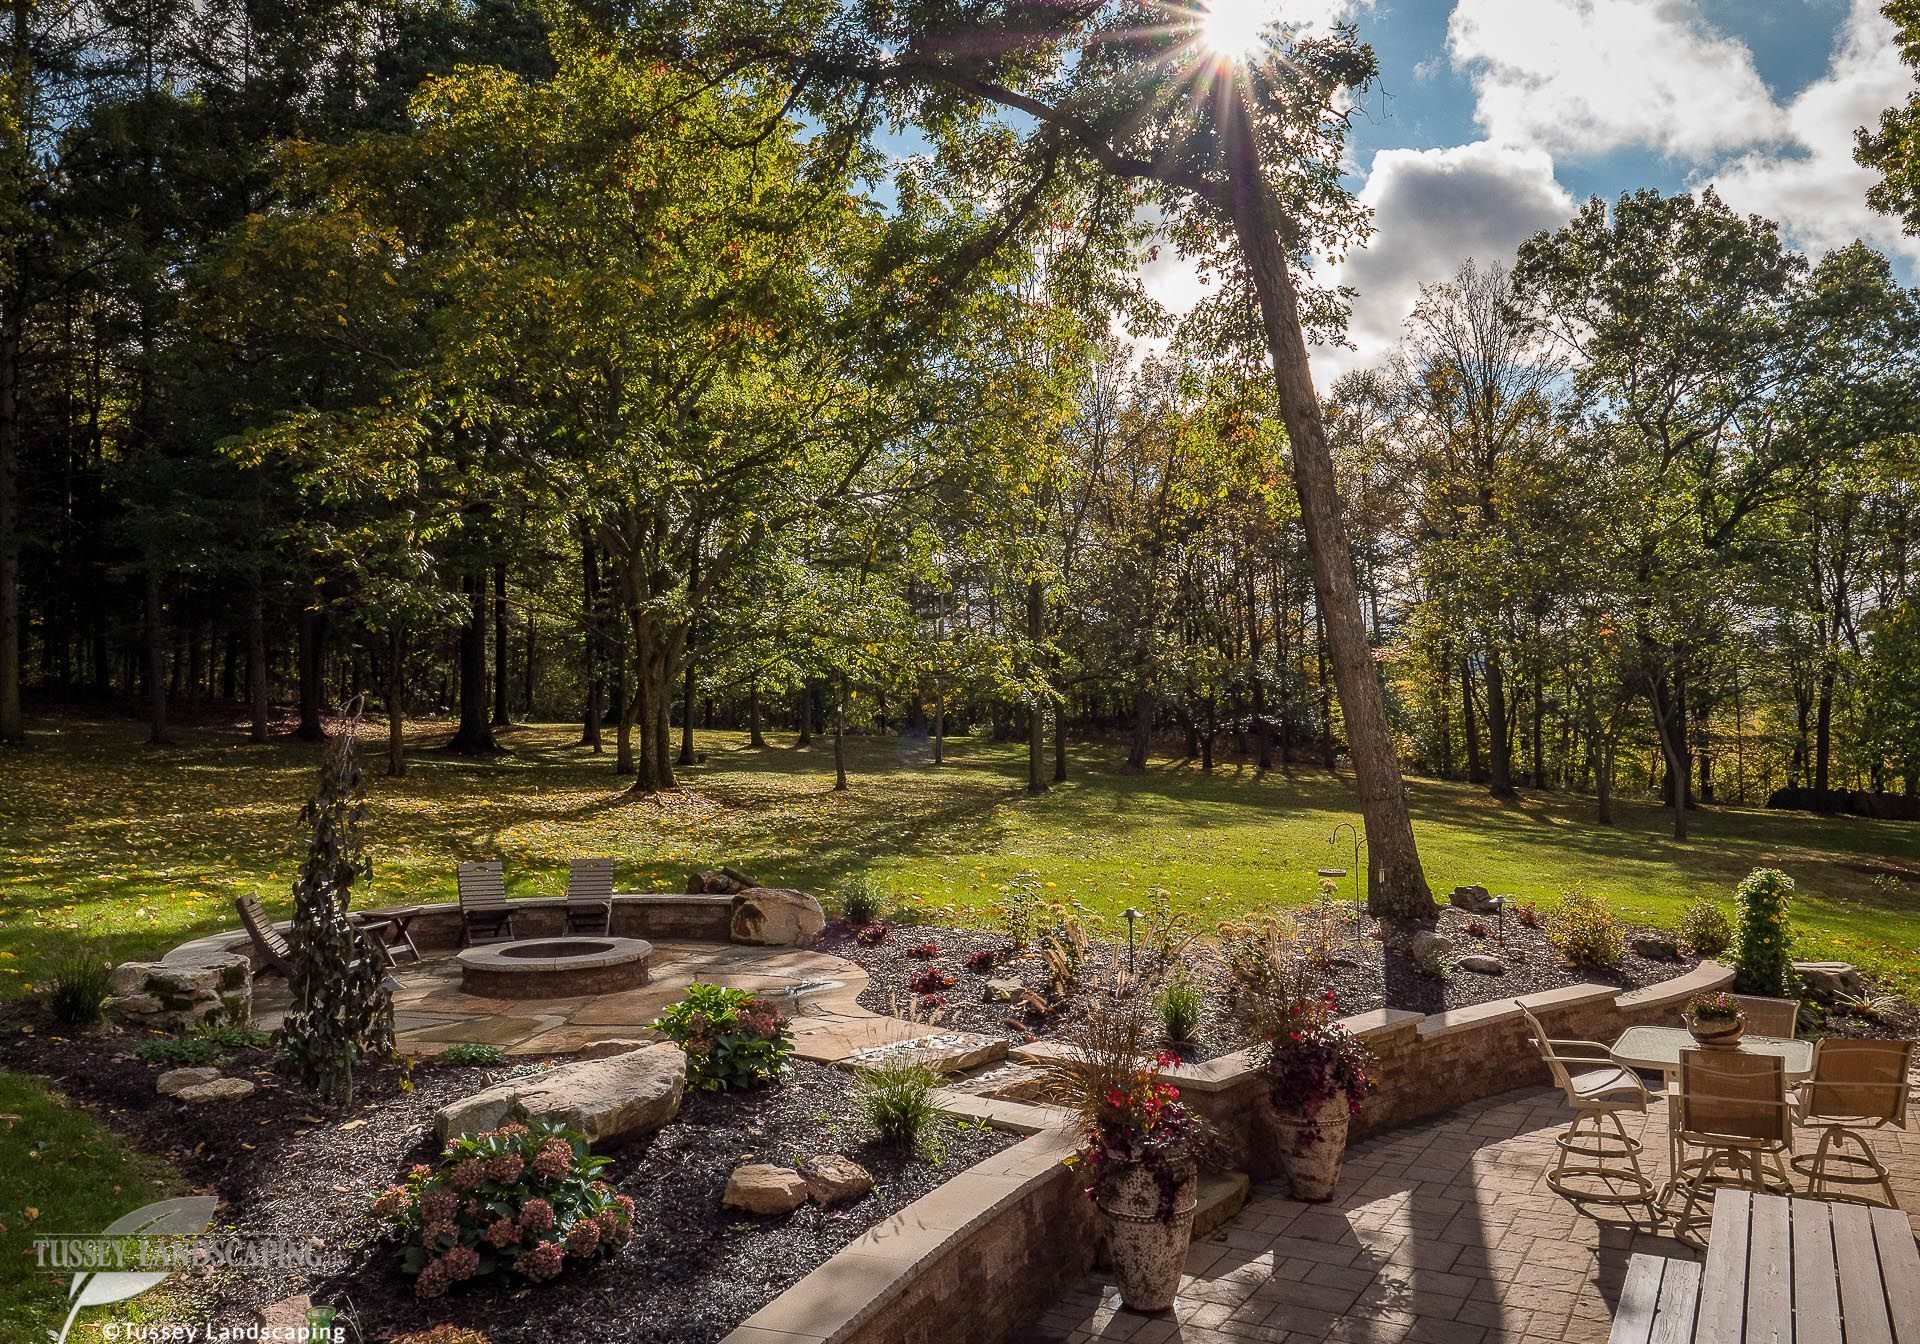 A stone patio with a fire pit in the middle of a wooded area.